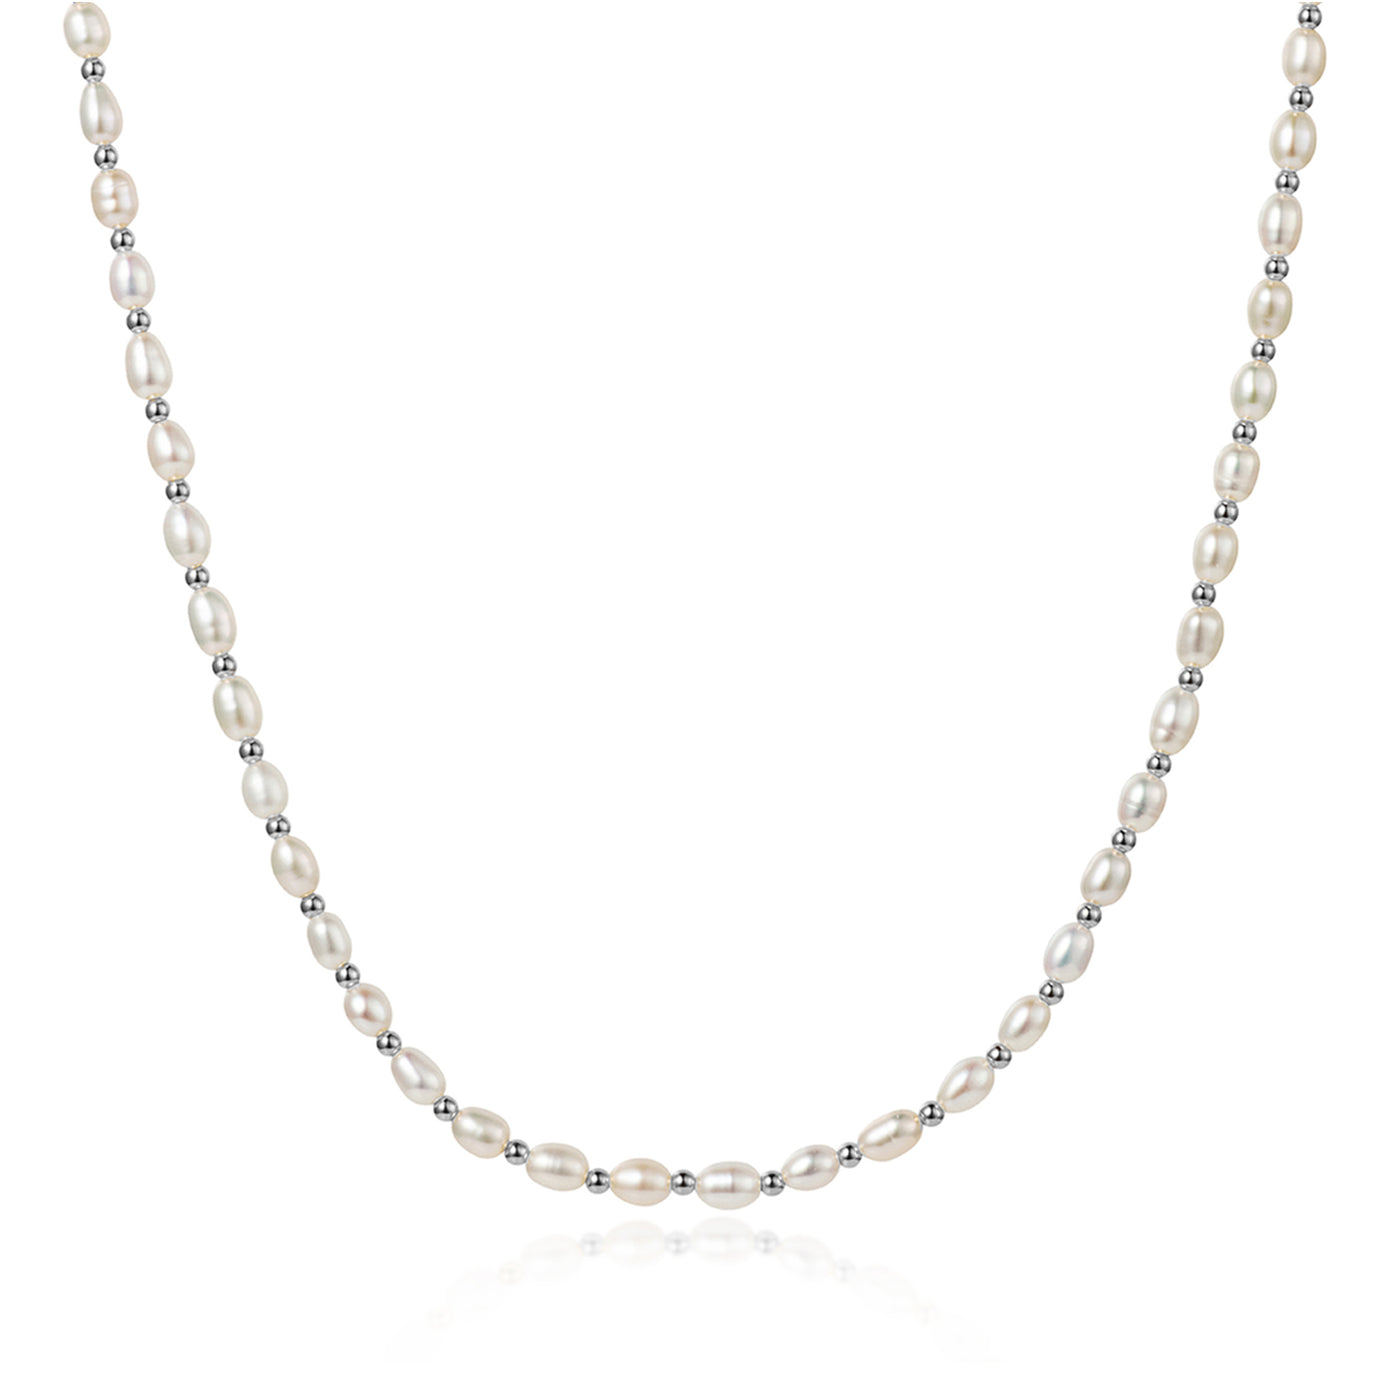 PHoto of Freshwater Pearl Necklace With Silver Beads